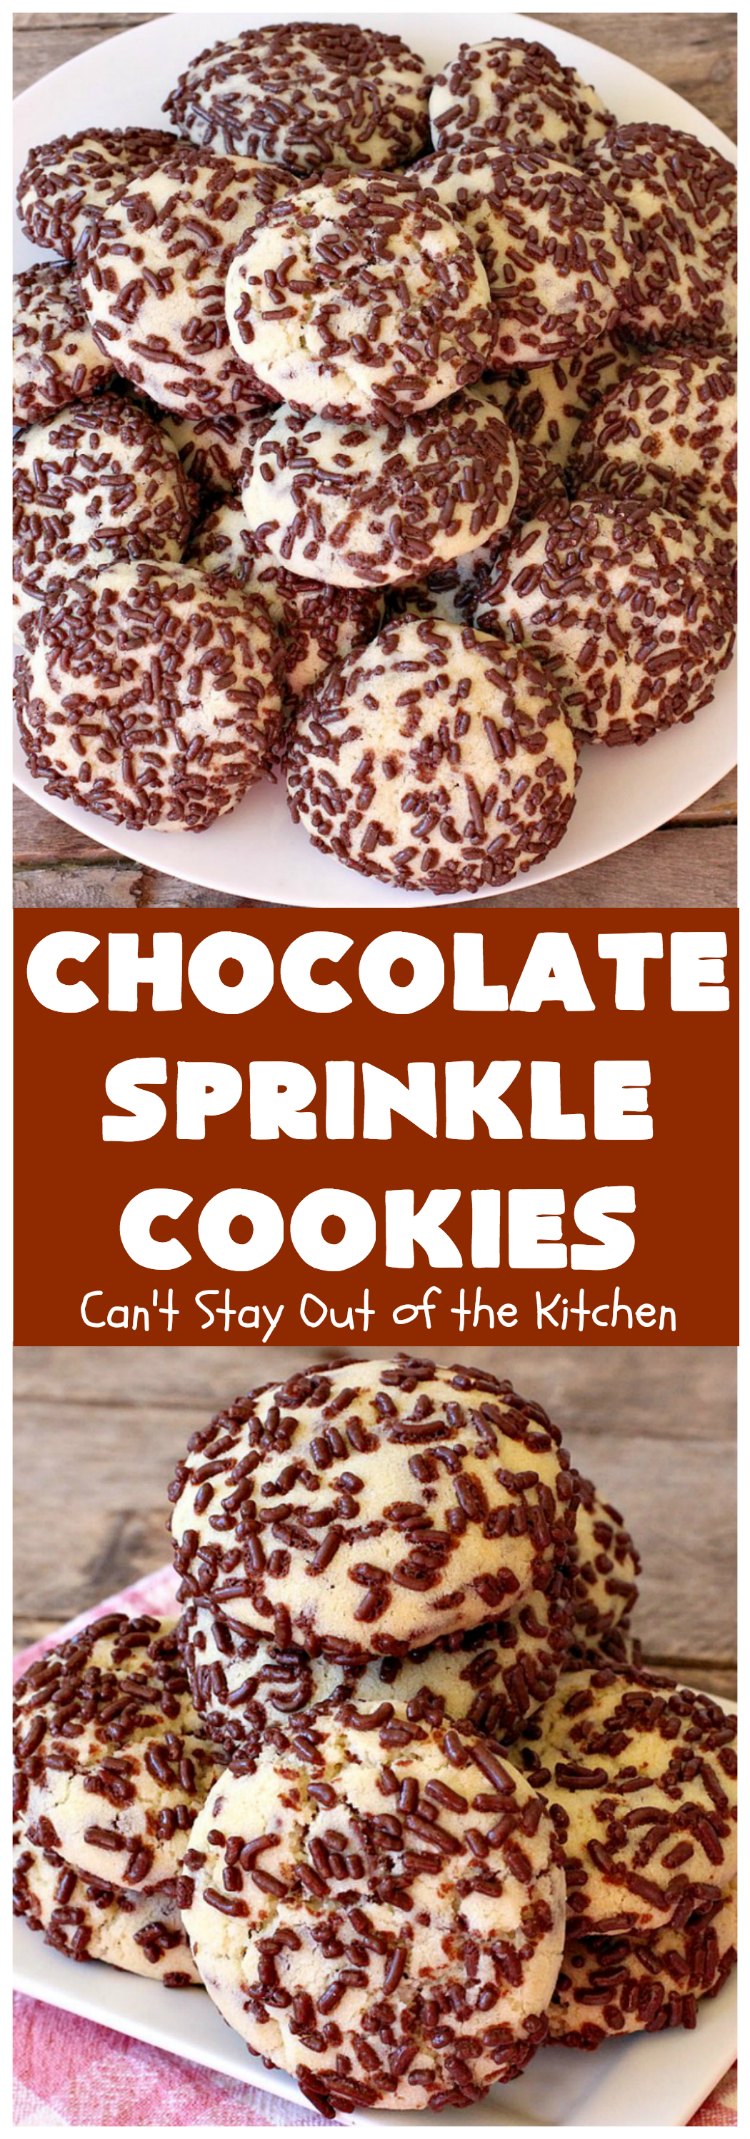 Chocolate Sprinkle Cookies | Can't Stay Out of the Kitchen